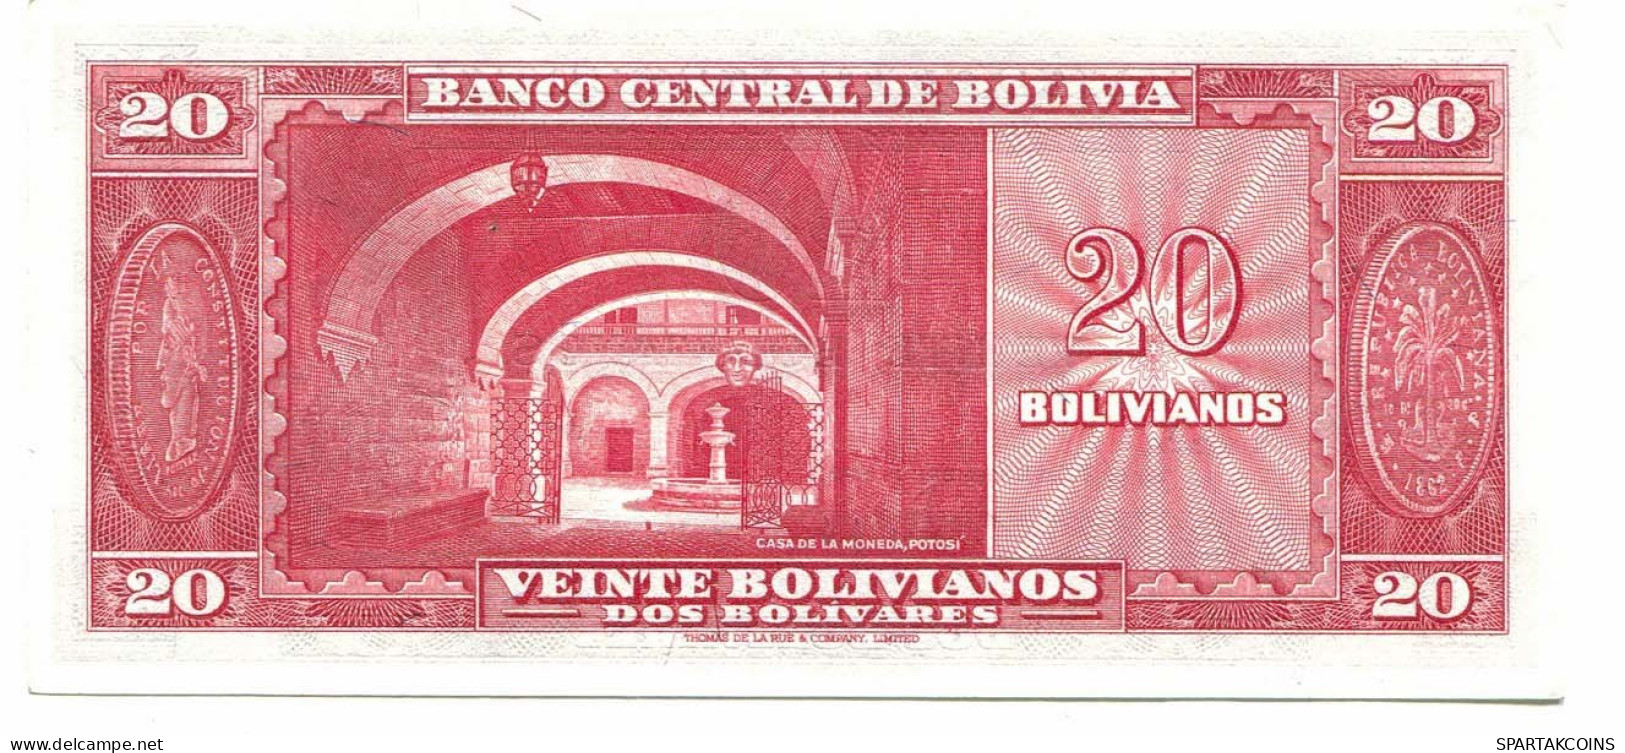 BOLIVIA 20 BOLIVIANOS 1945 SERIE P AUNC Paper Money Banknote #P10798.4 - [11] Local Banknote Issues